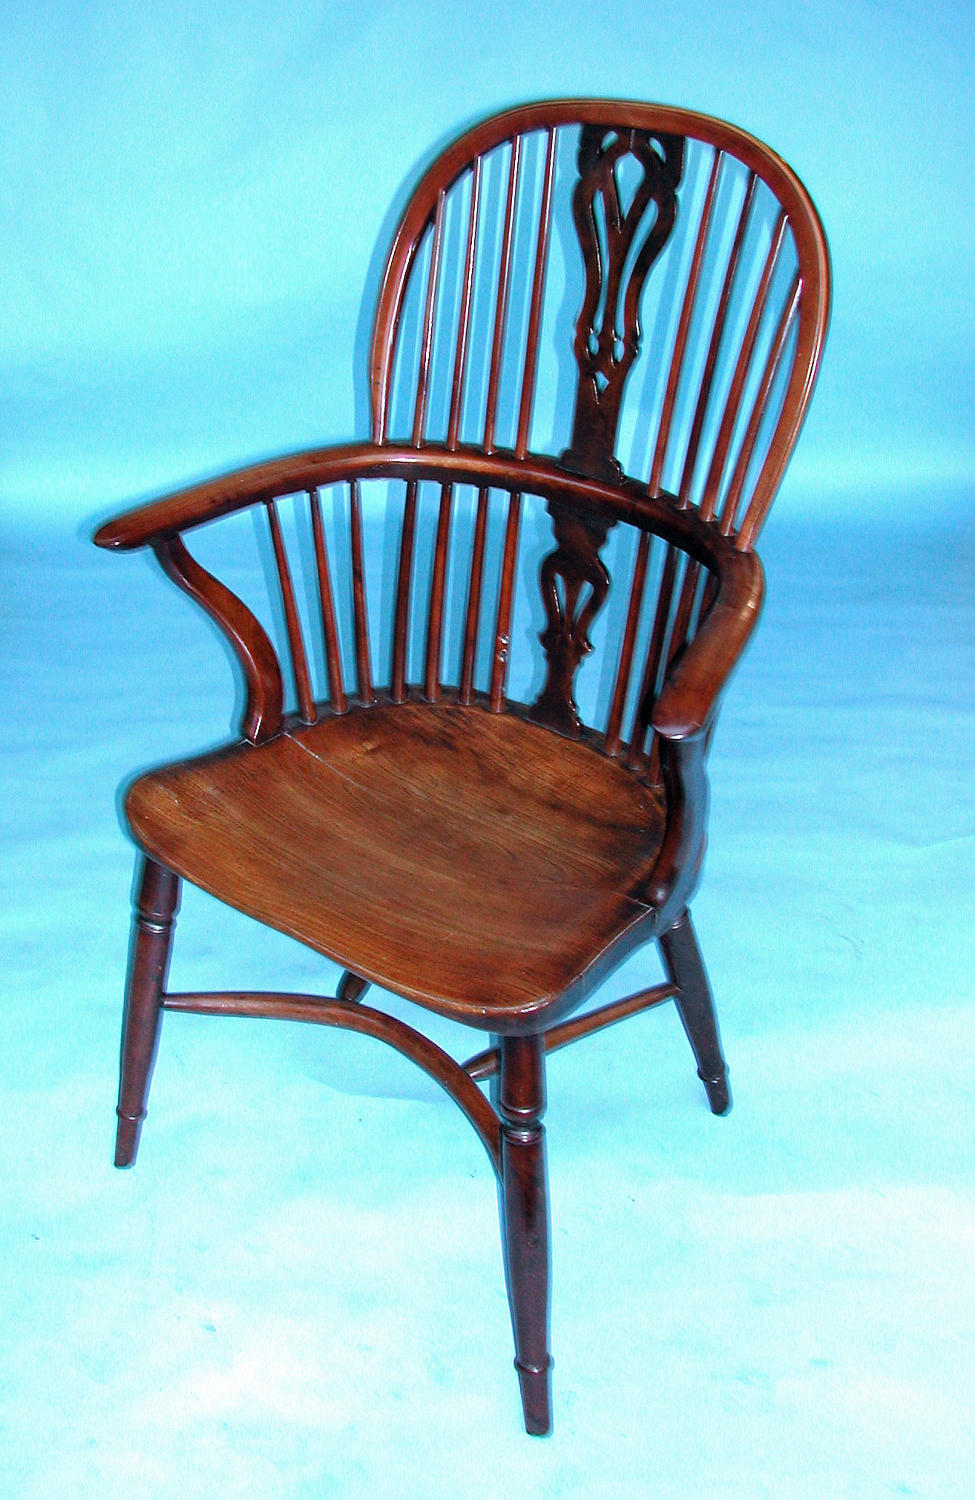 Early 19thc Country Furniture Yew Wood Windsor Chair.  English. C1820